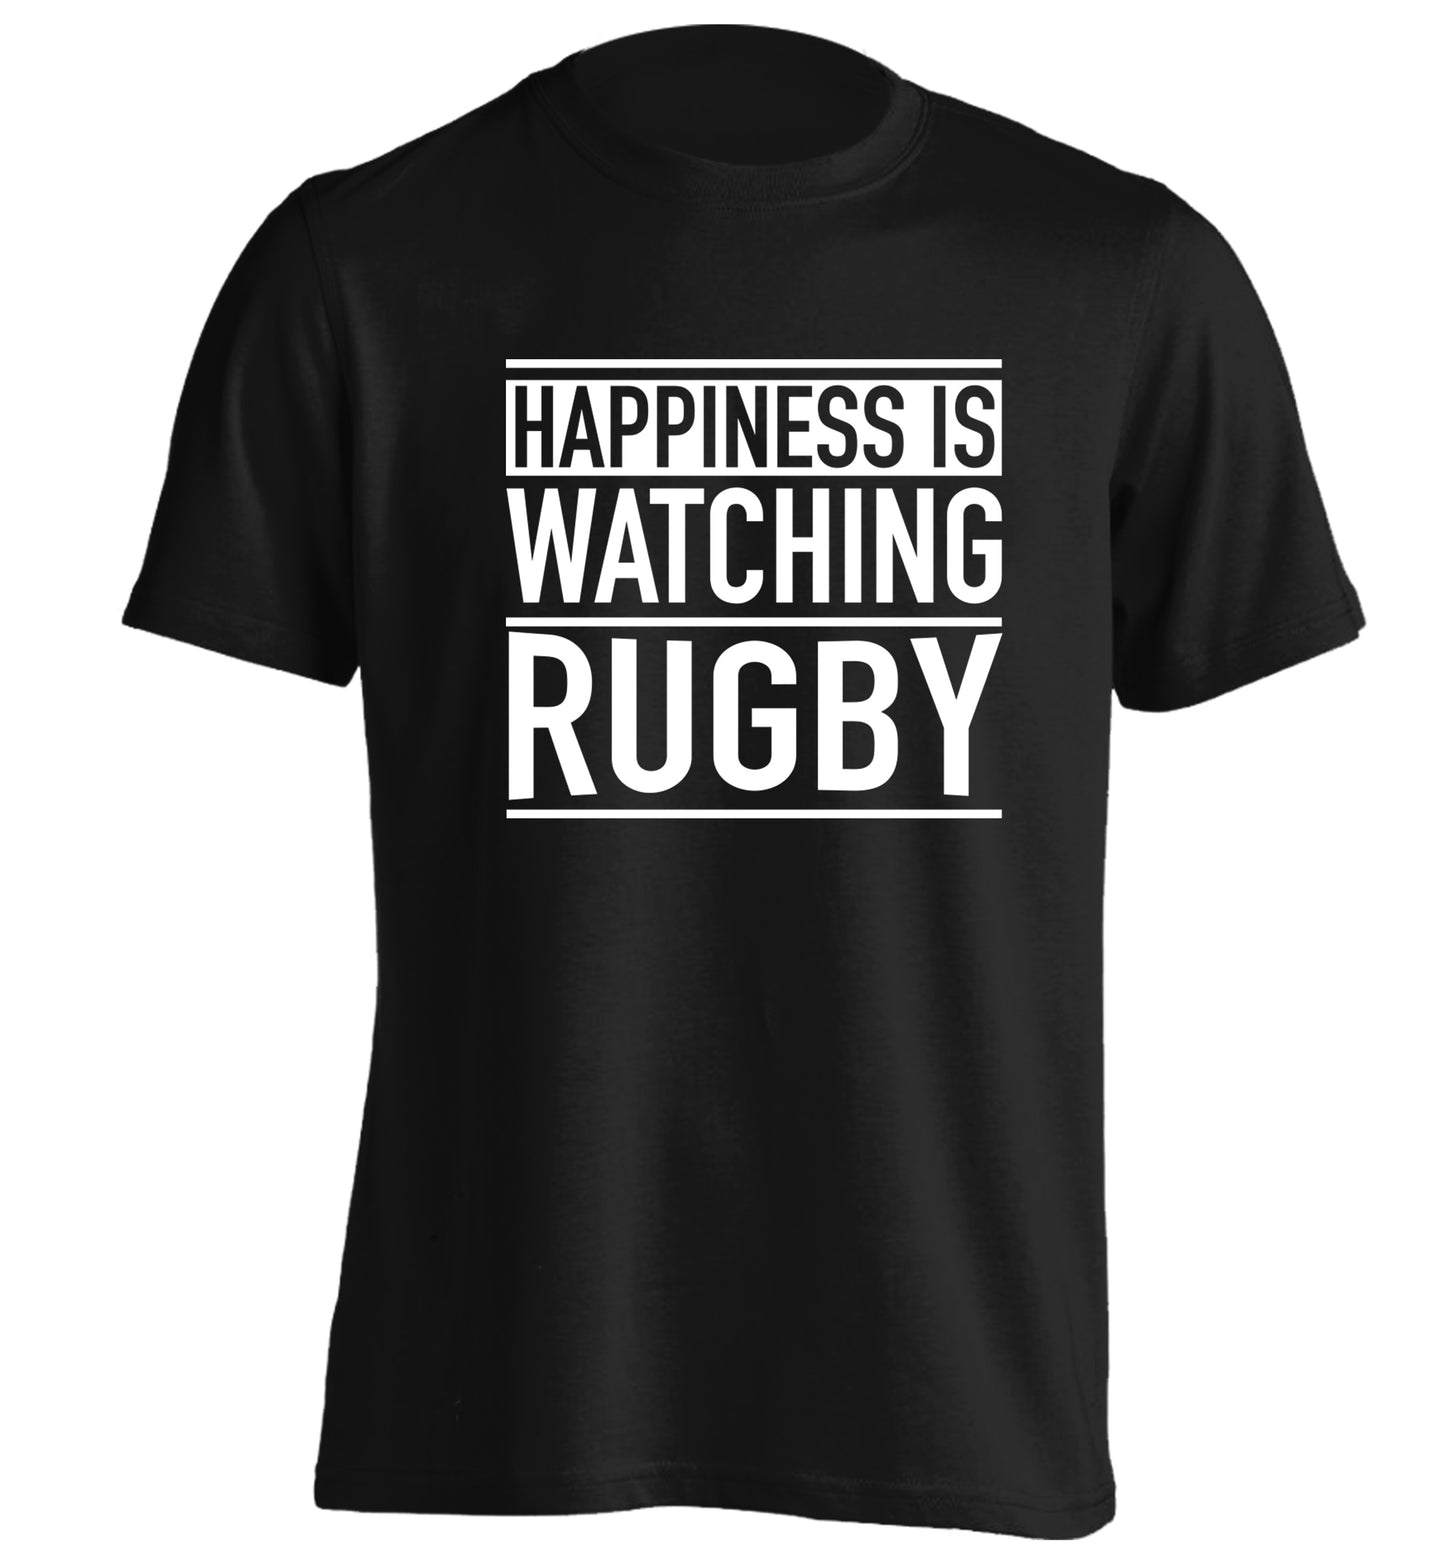 Happiness is watching rugby adults unisex black Tshirt 2XL